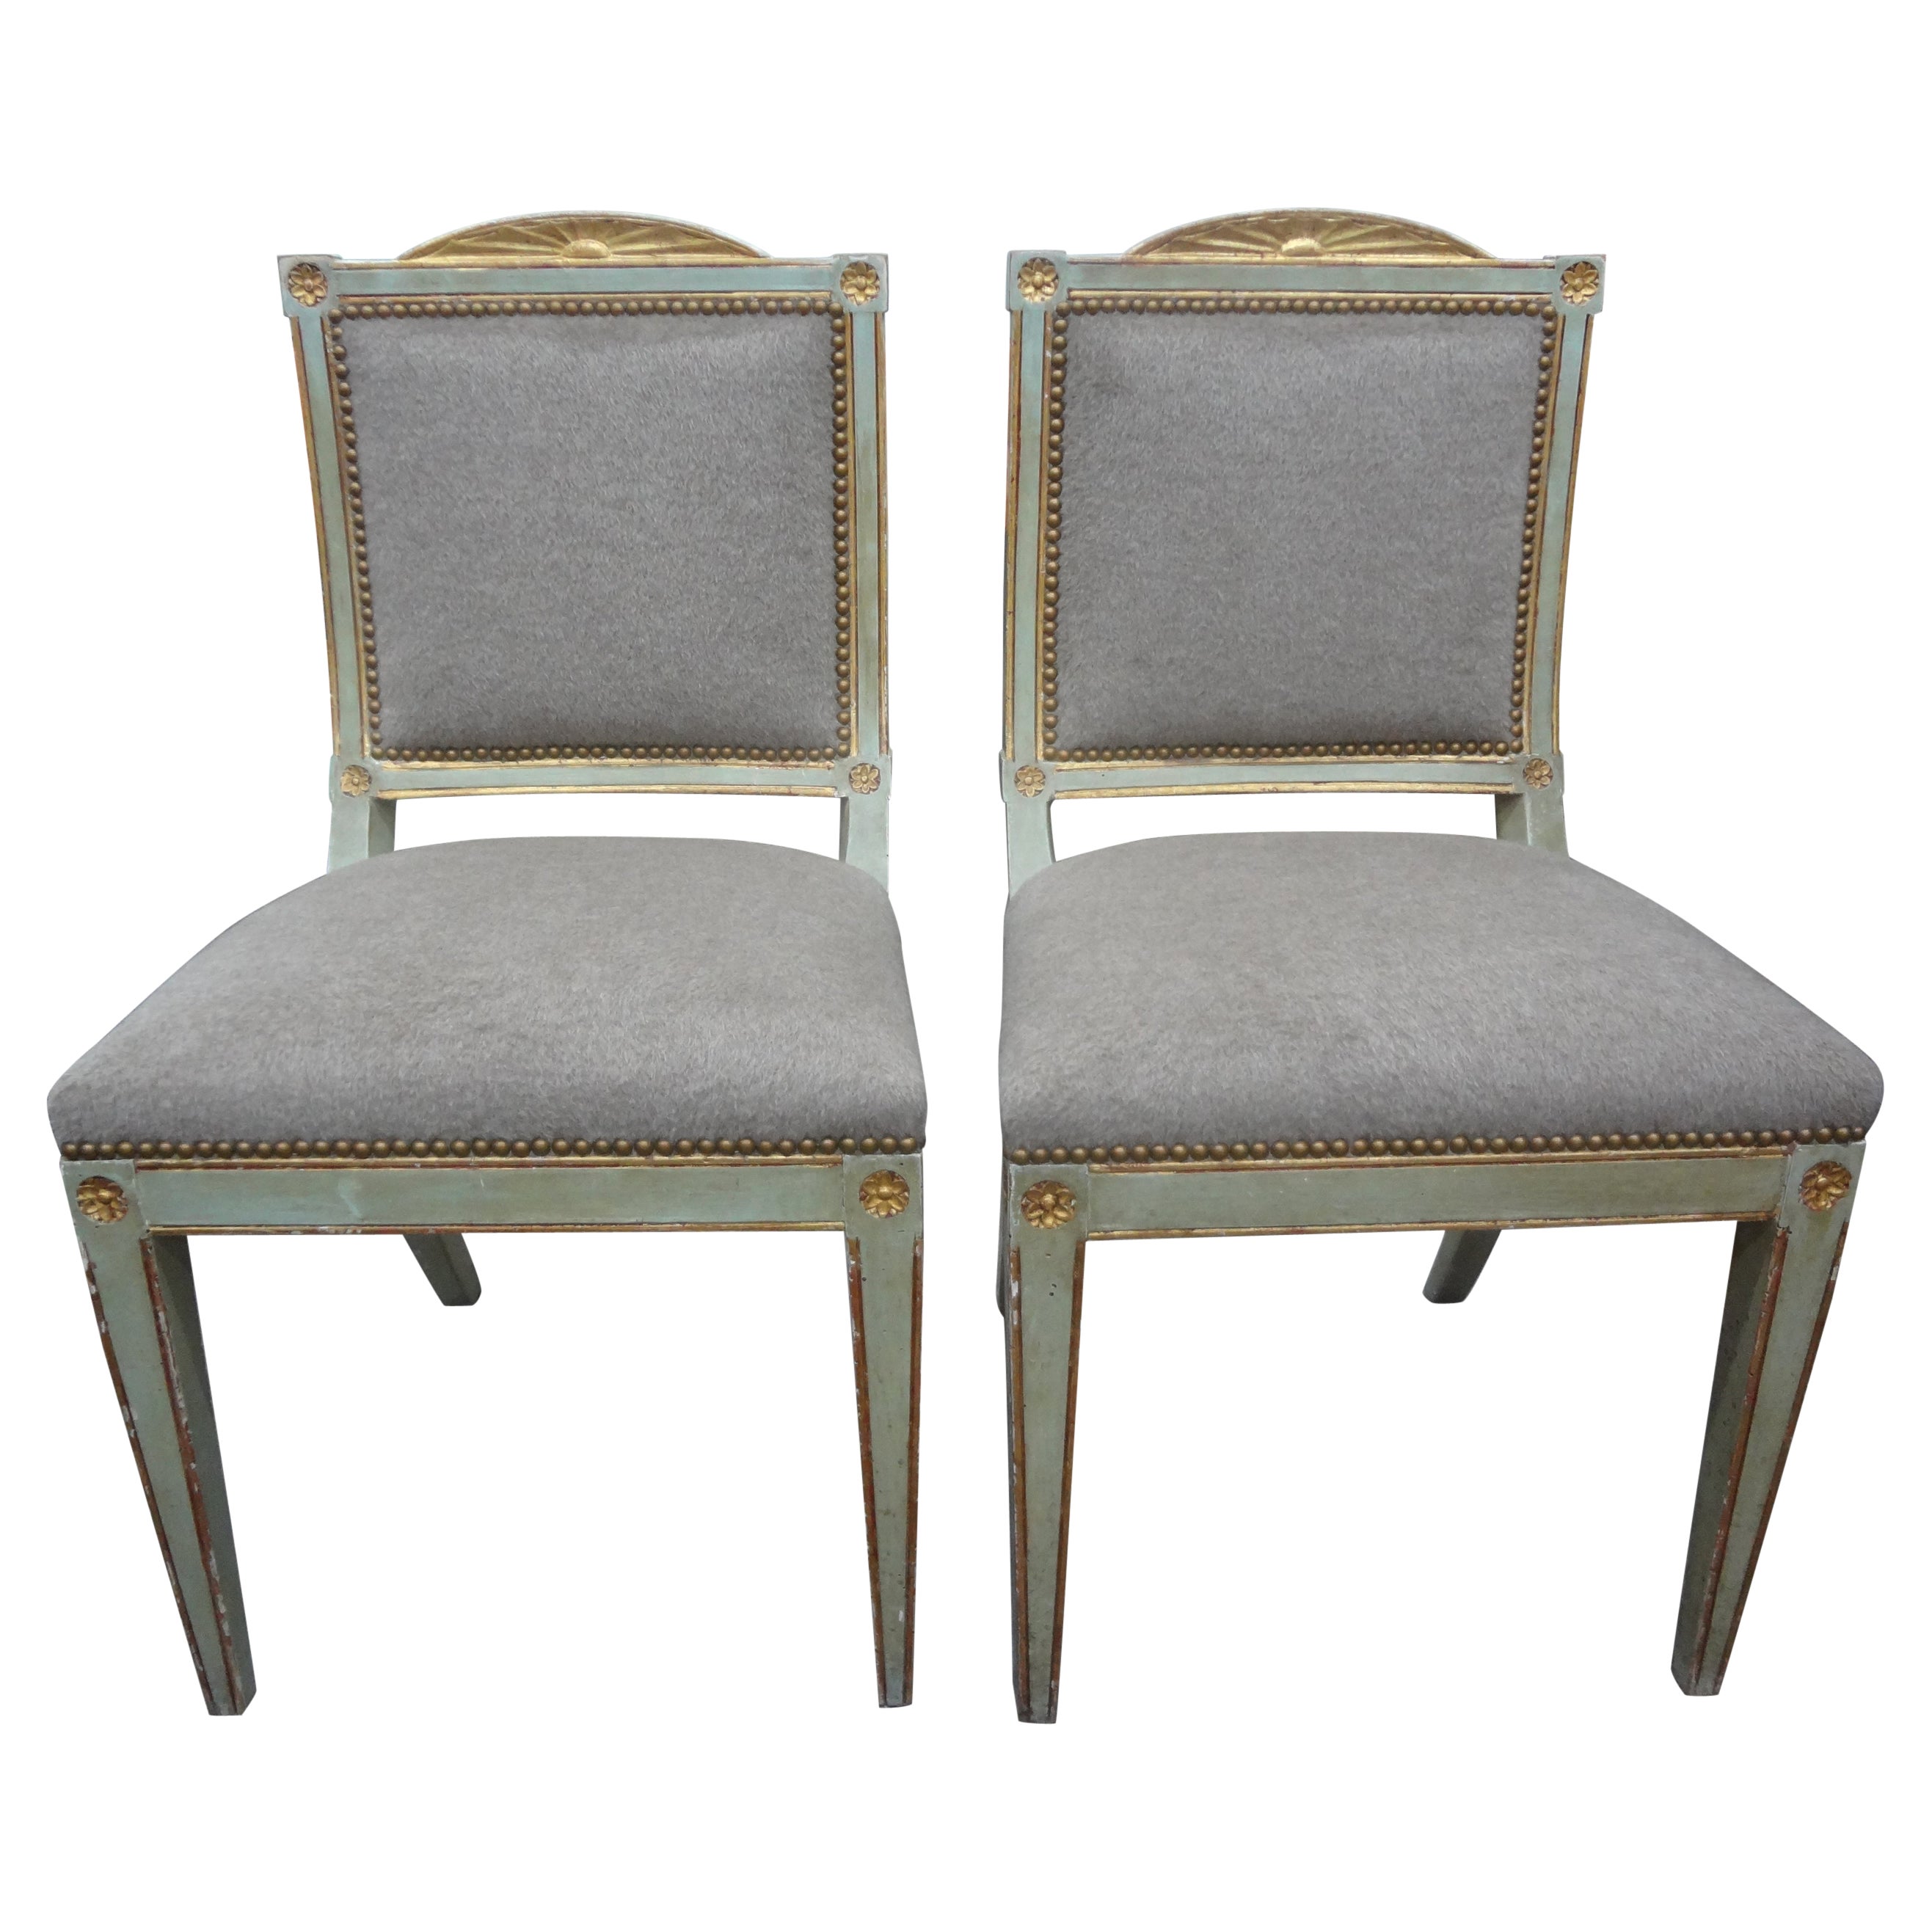 Pair of 18th Century Italian Directoire Painted and Parcel Gilt Chairs